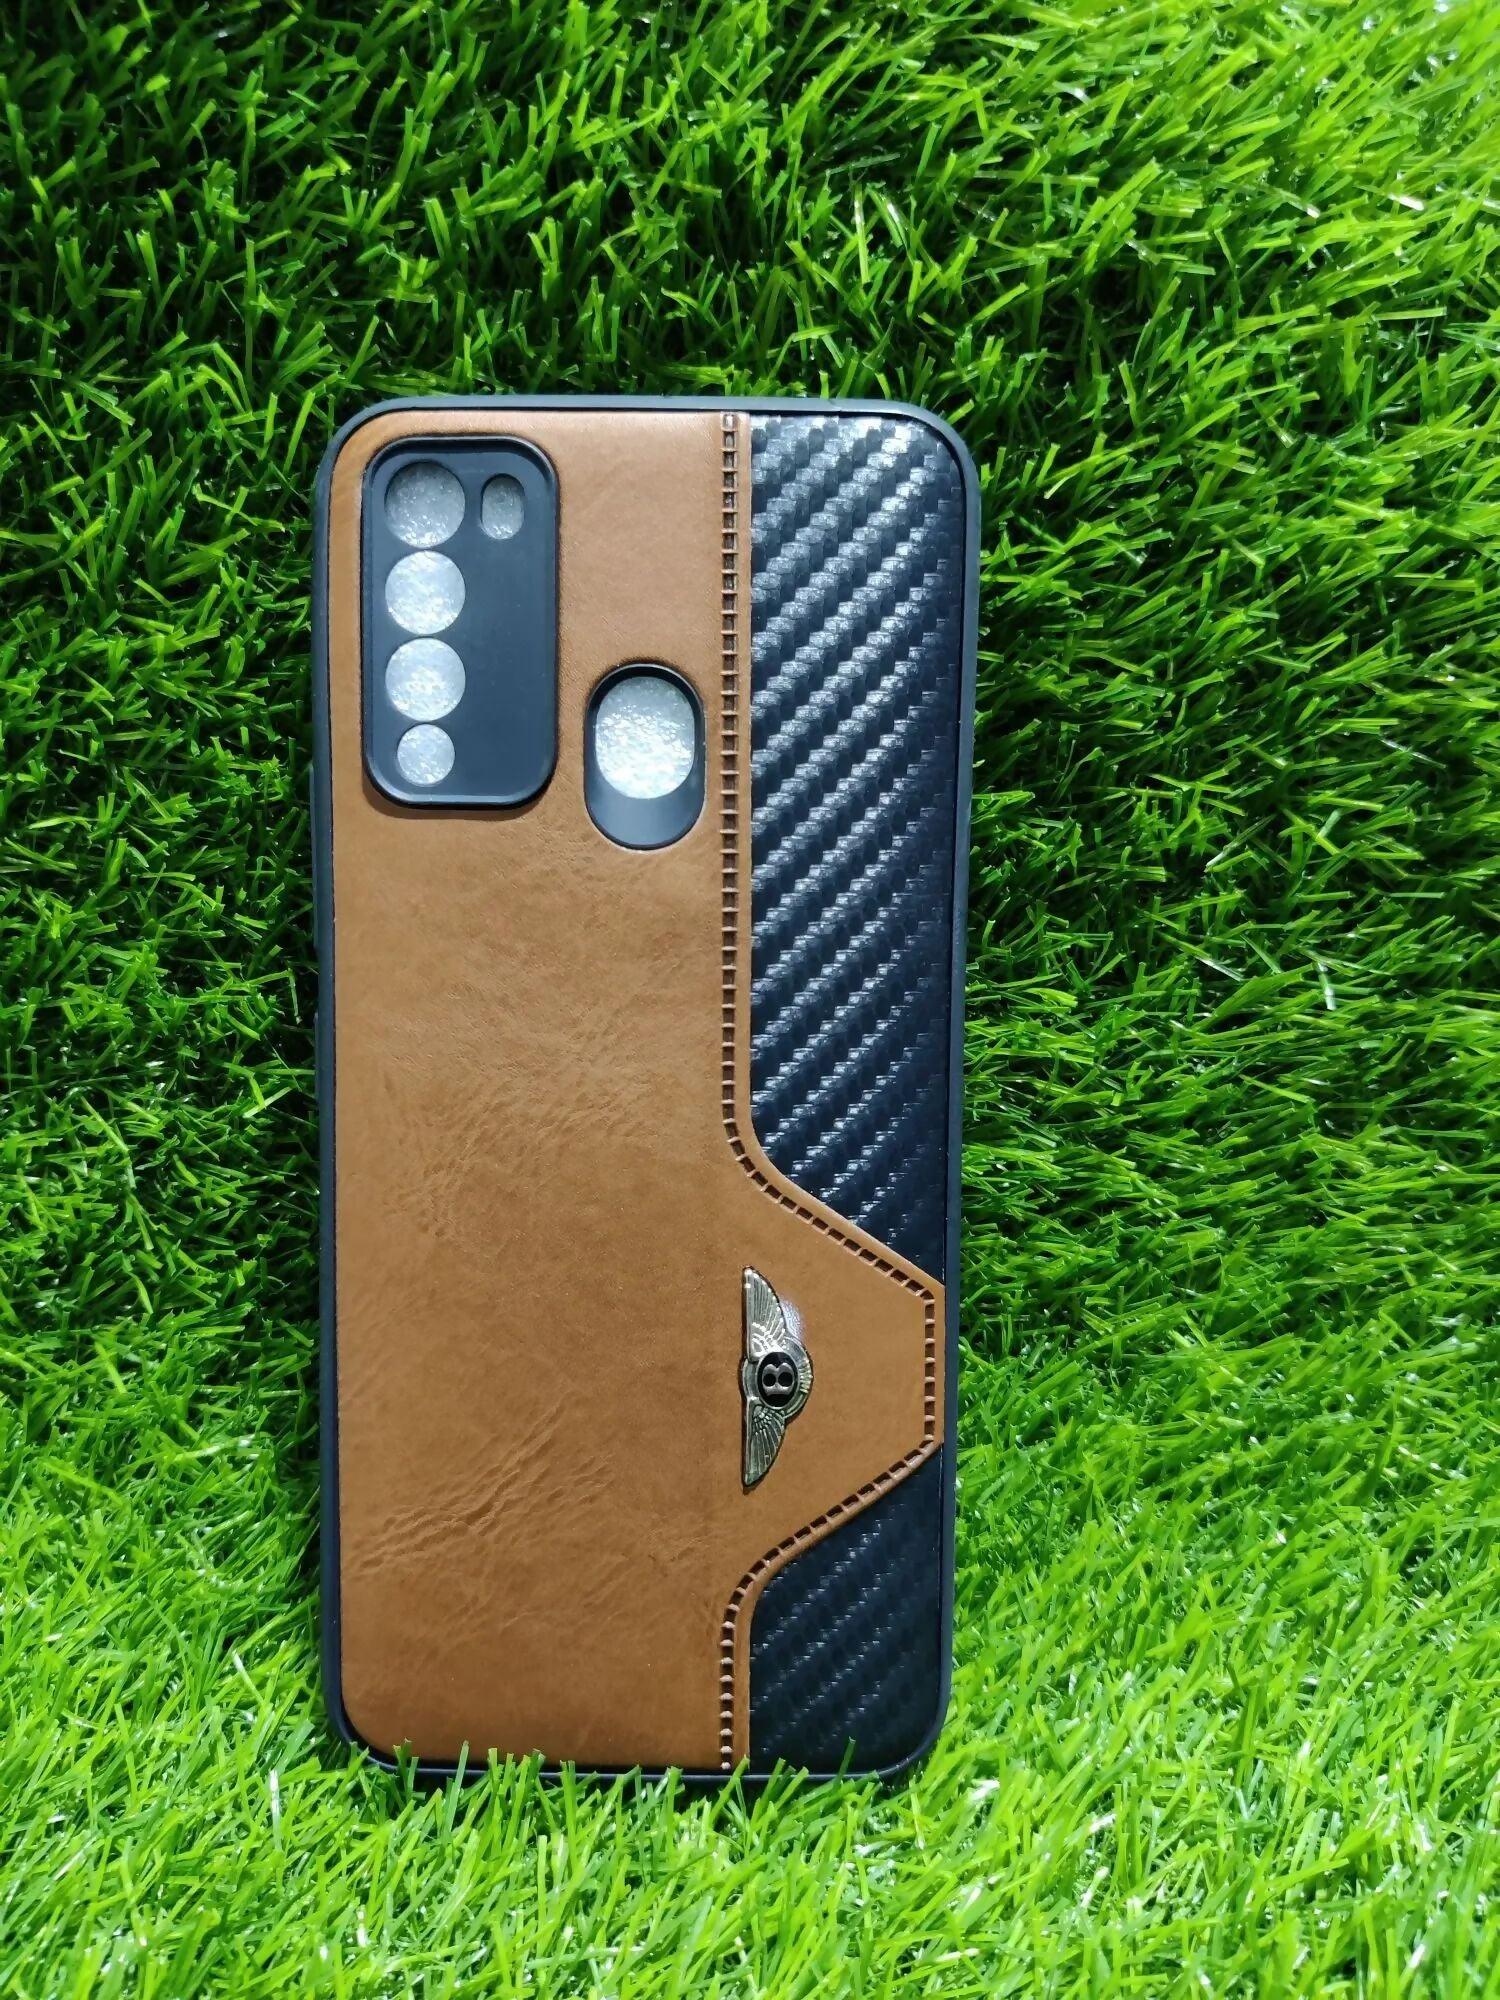 Itel vision 2 back cover - ValueBox